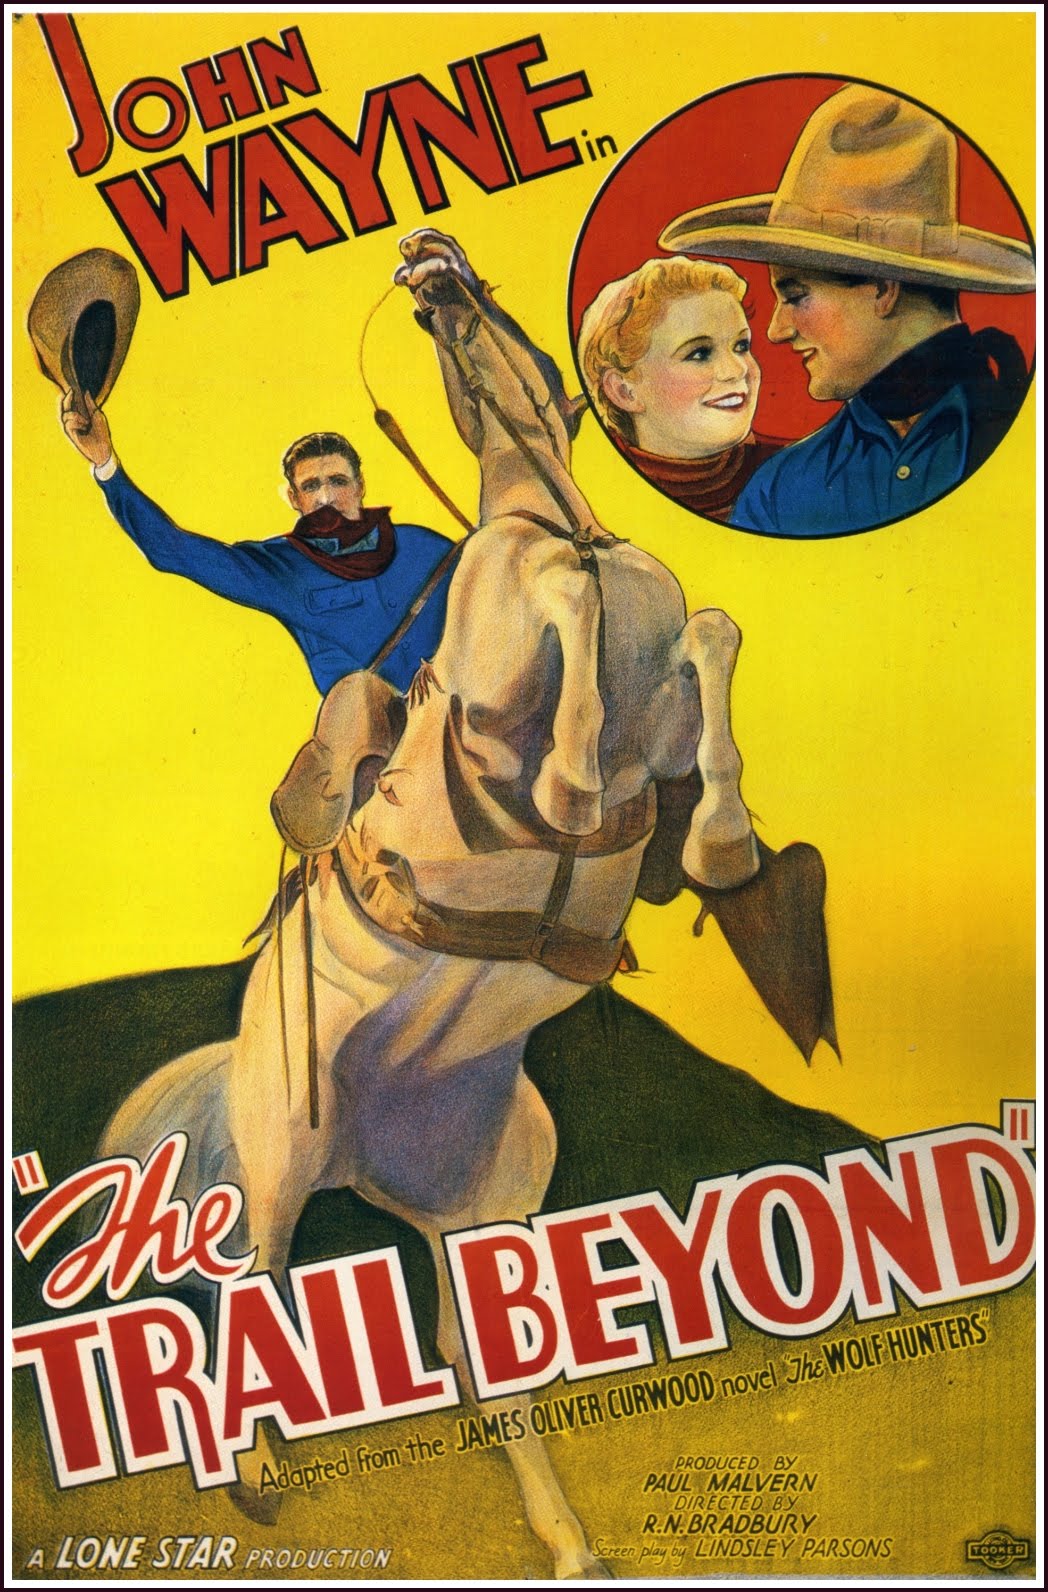 Partners Of The Trail [1944]